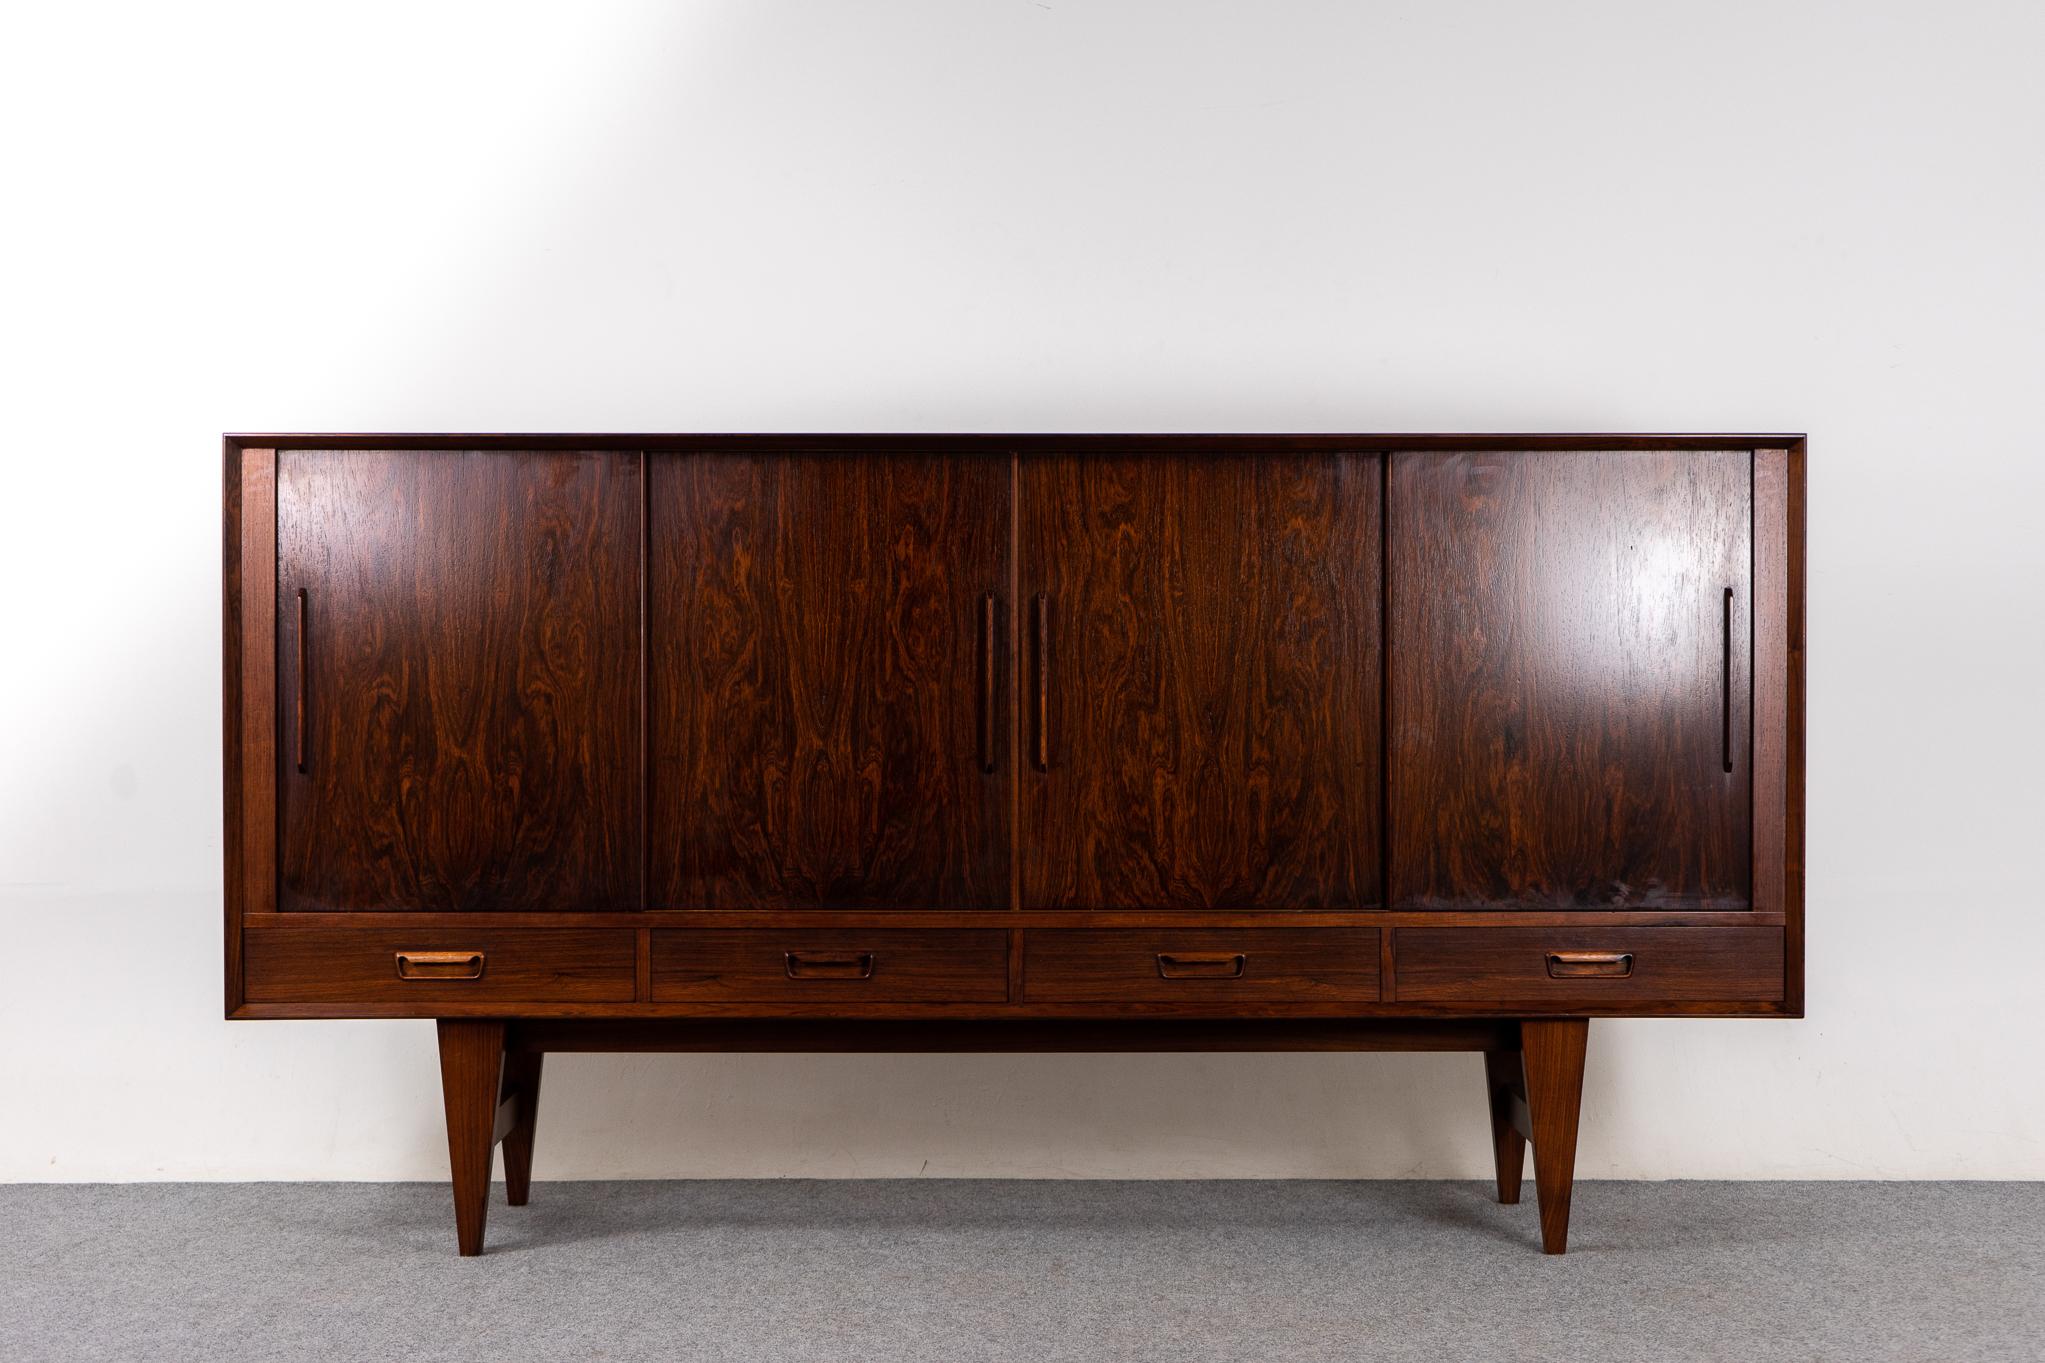 Rosewood Danish modern sideboard with integrated bar, circa 1960's. Clean lined design with exceptional book-matched veneer! Sliding doors and drawers offers ample storage for all your needs. 3 interior bays are outfitted with 6 adjustable shelves.